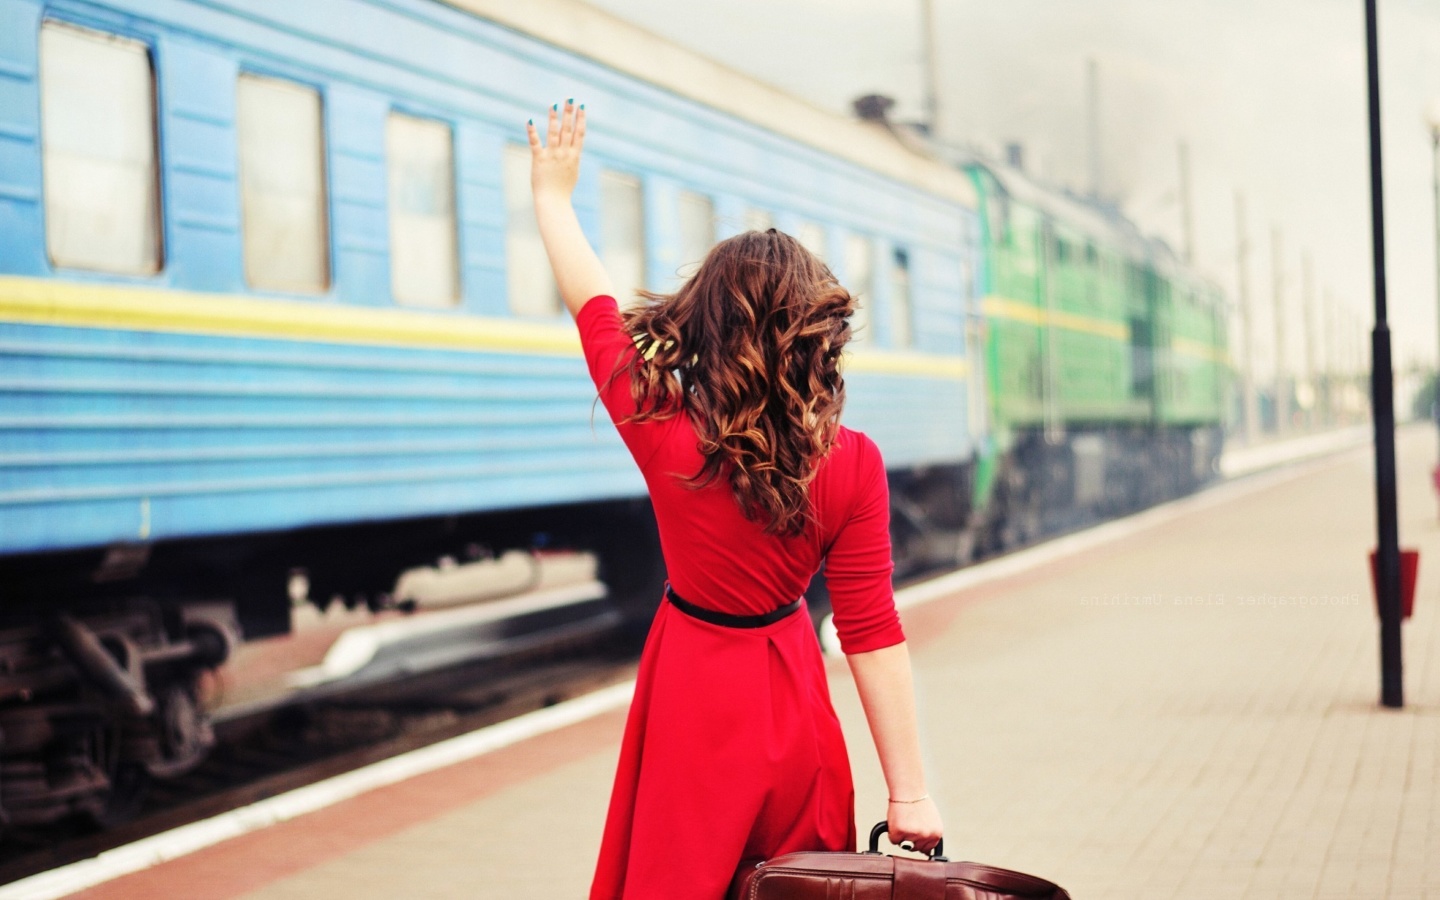 Das Girl traveling from train station Wallpaper 1440x900